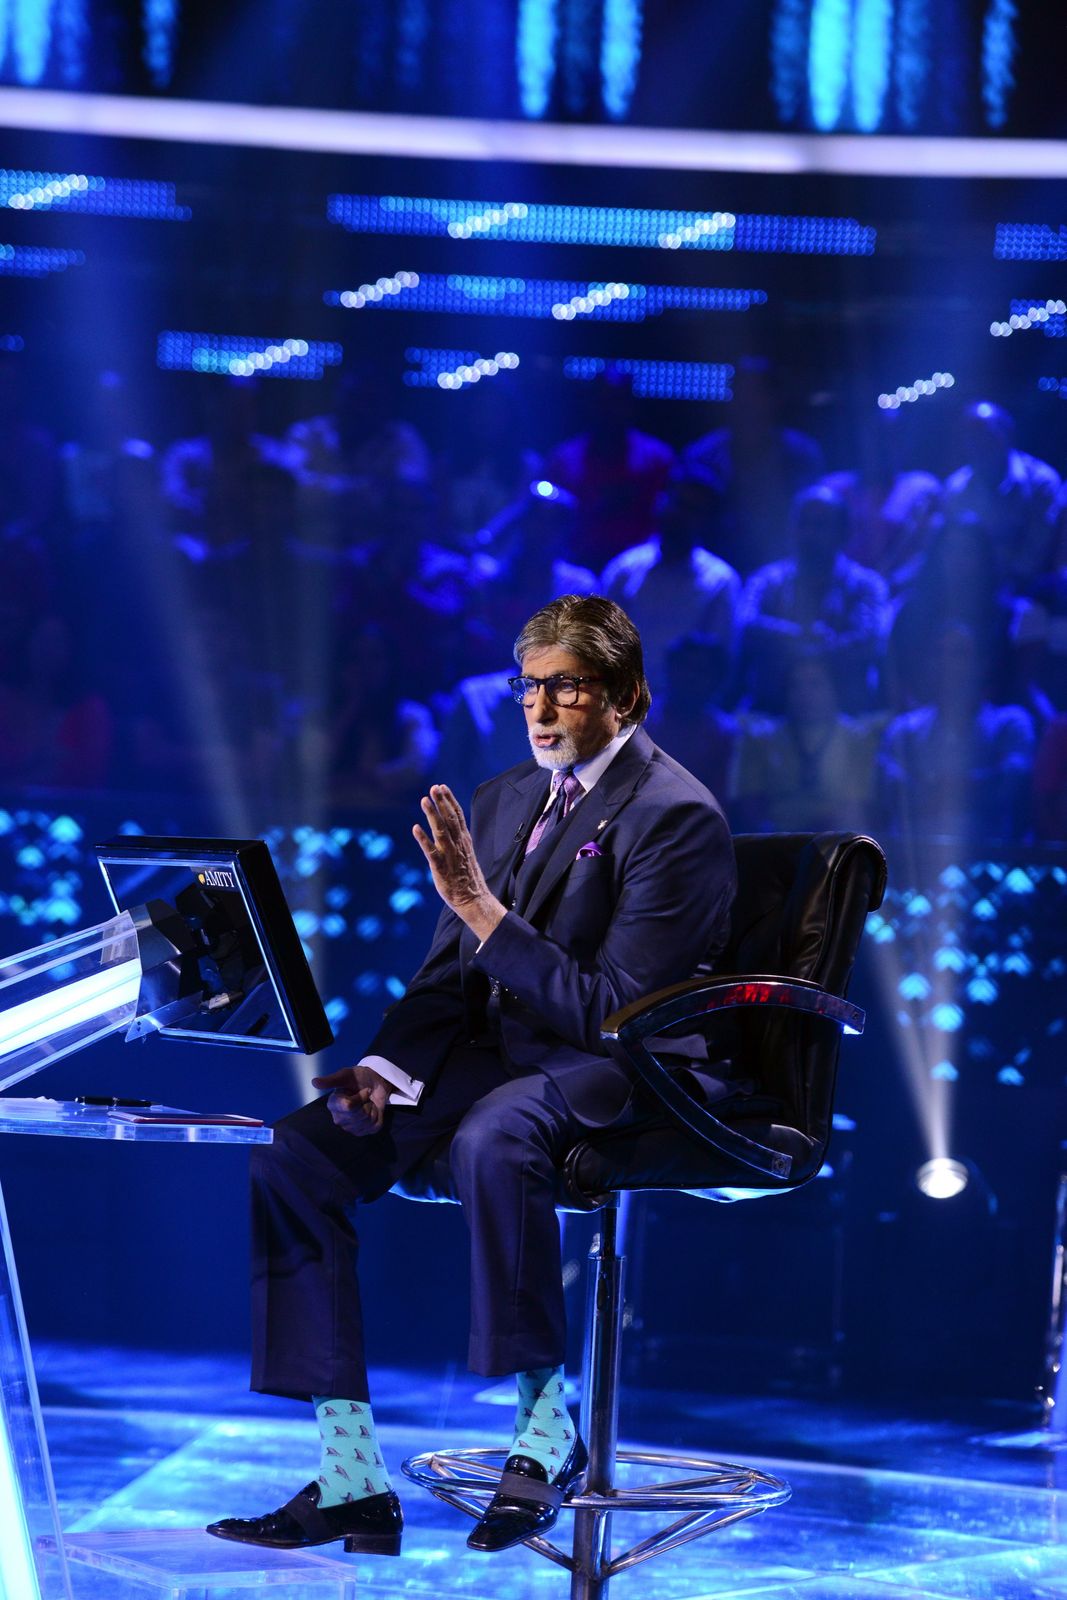 Kaun Banega Crorepati 11: As Amitabh Bachchan's Game Show Returns Know What's New, Where To Watch And Other Details